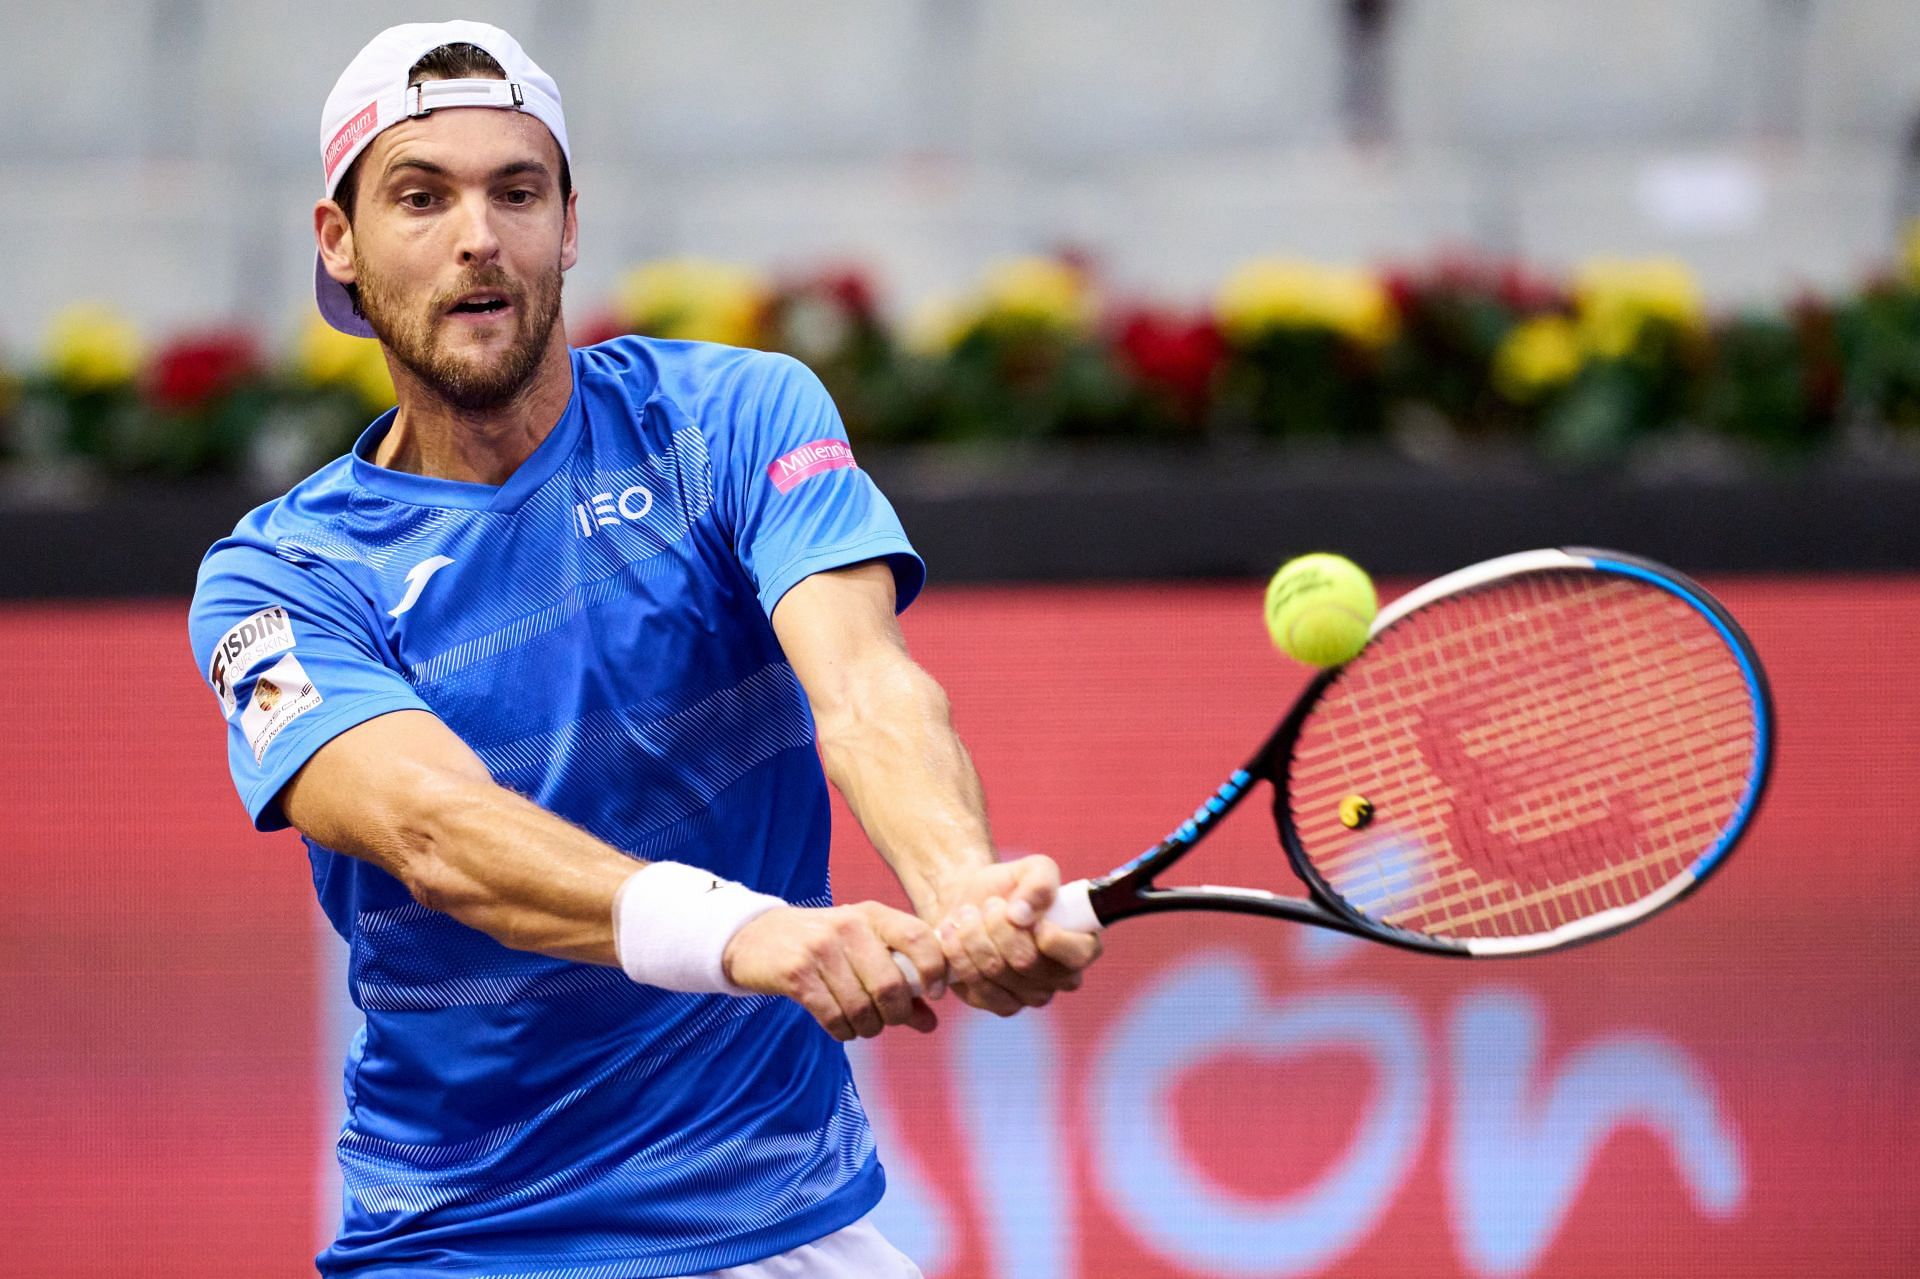 Sousa is eyeing a last-four spot in Cordoba.